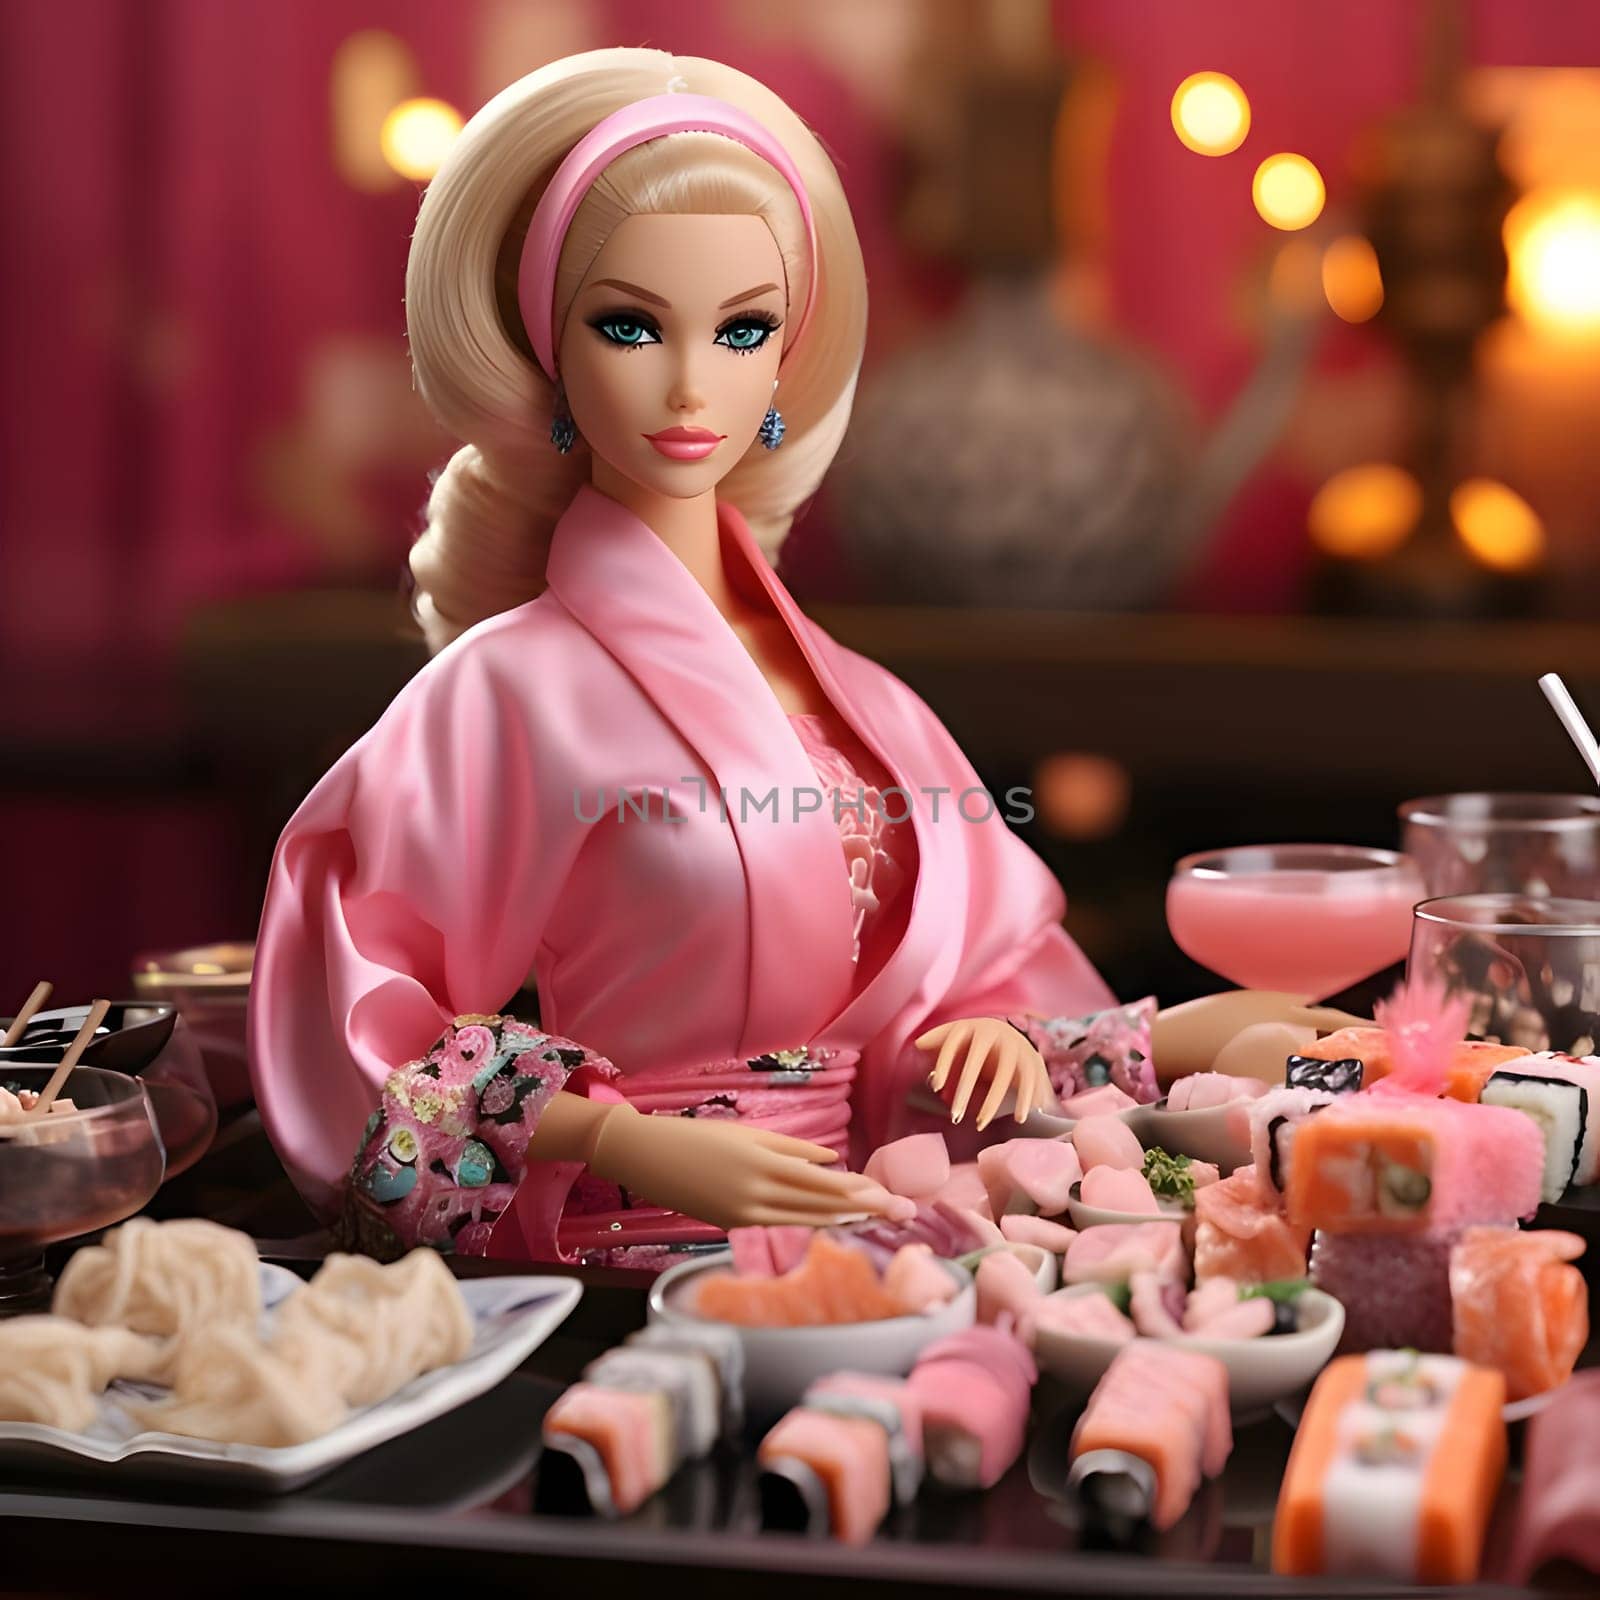 Bold-haired Barbie in pink clothes at a table set with sushi. by ThemesS